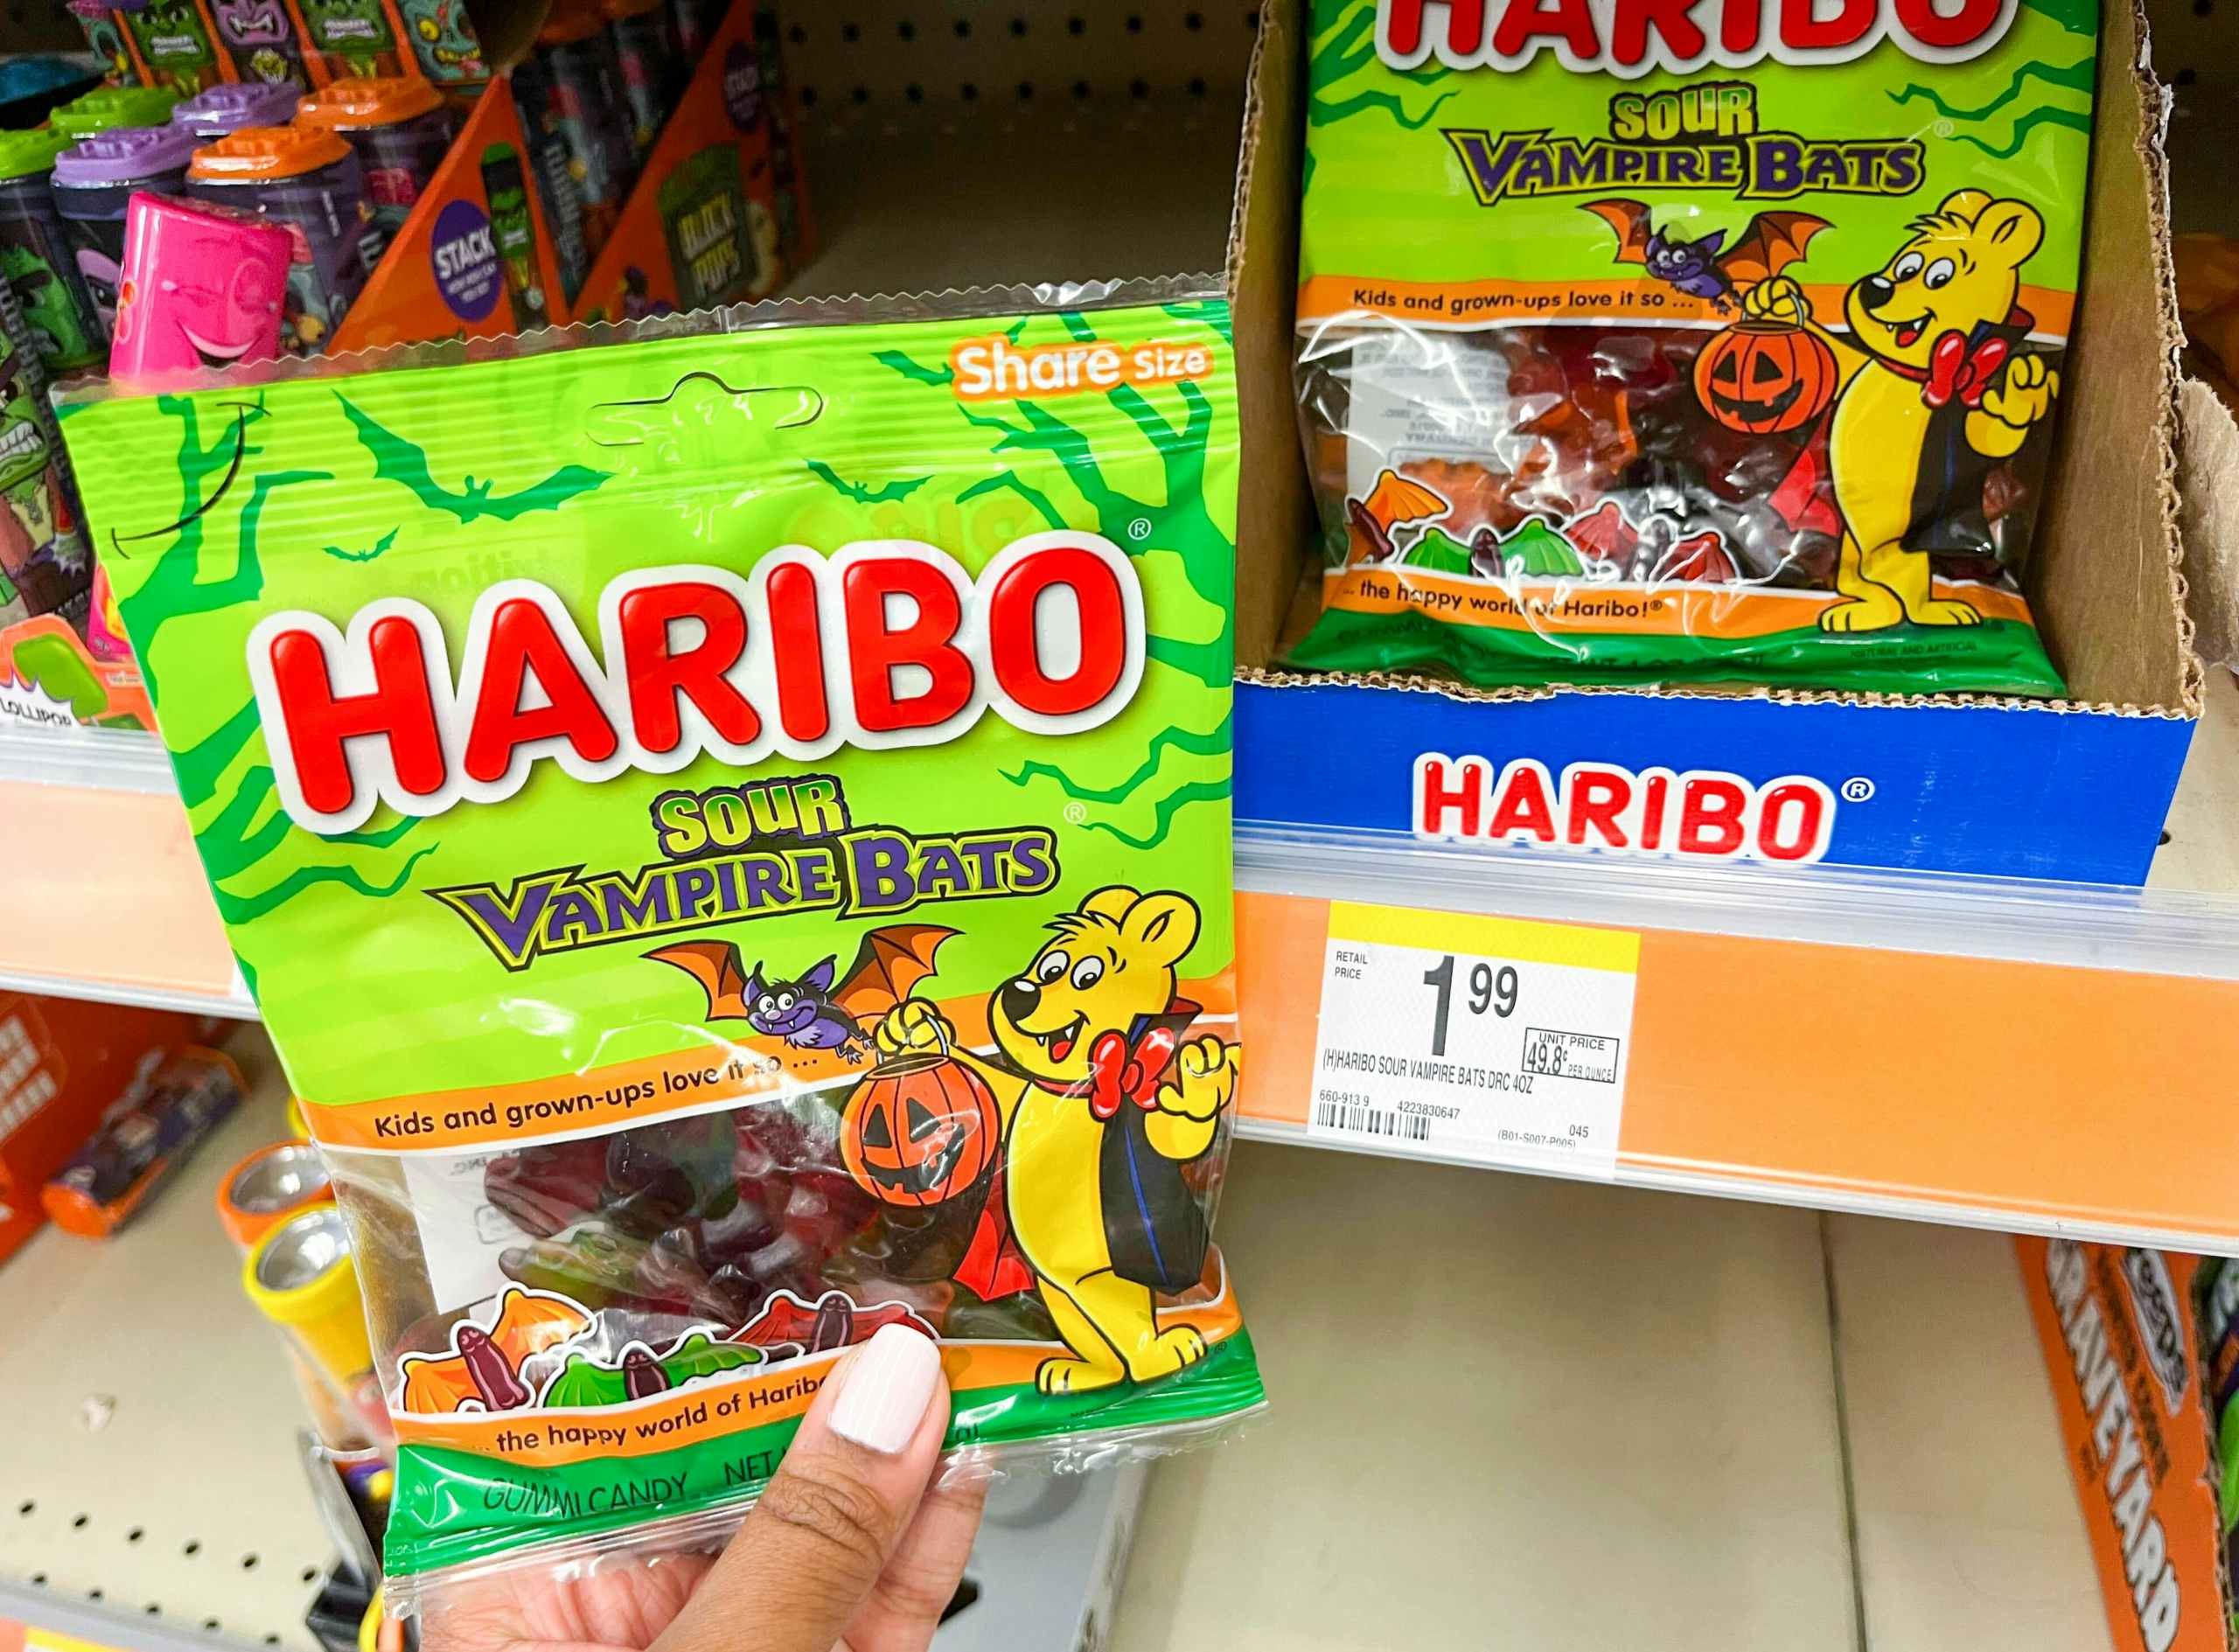 hand holding pack of Haribo sour vampire bats candy next to price tag